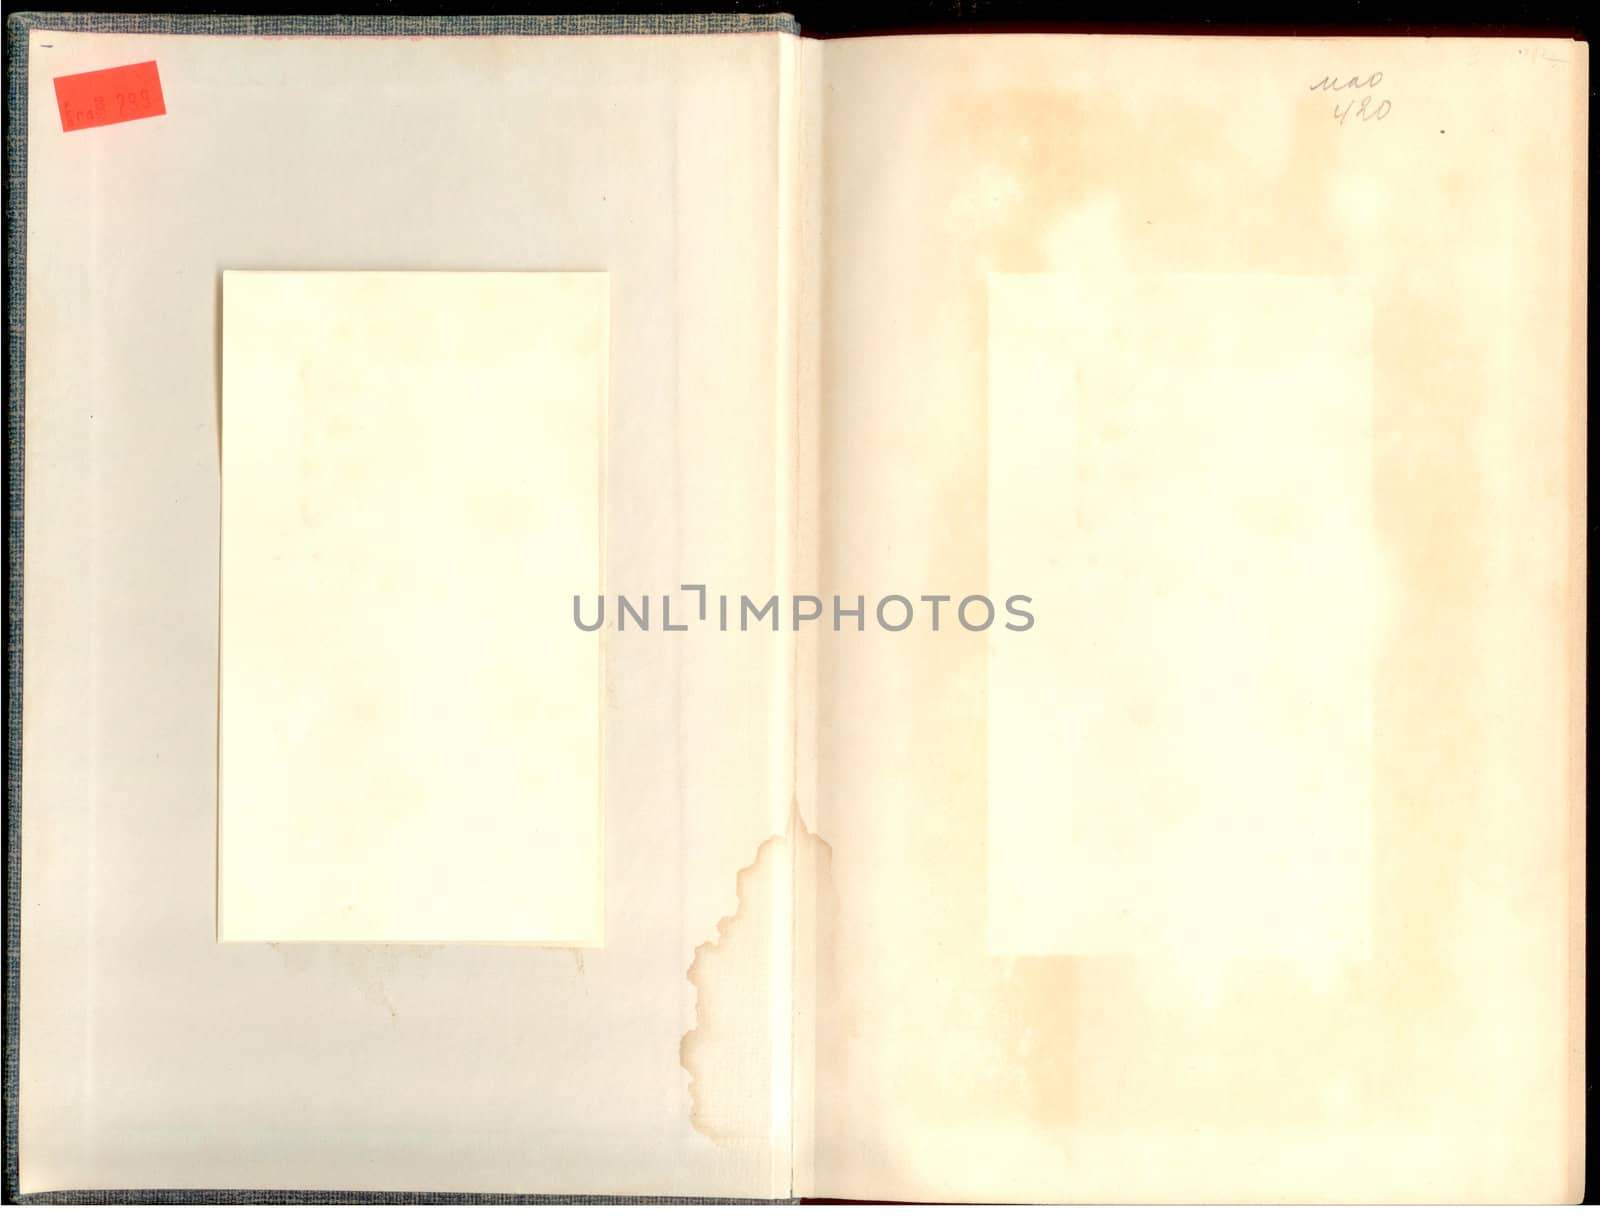 Old antique paper from a book or note pad blank retro background by jeremywhat